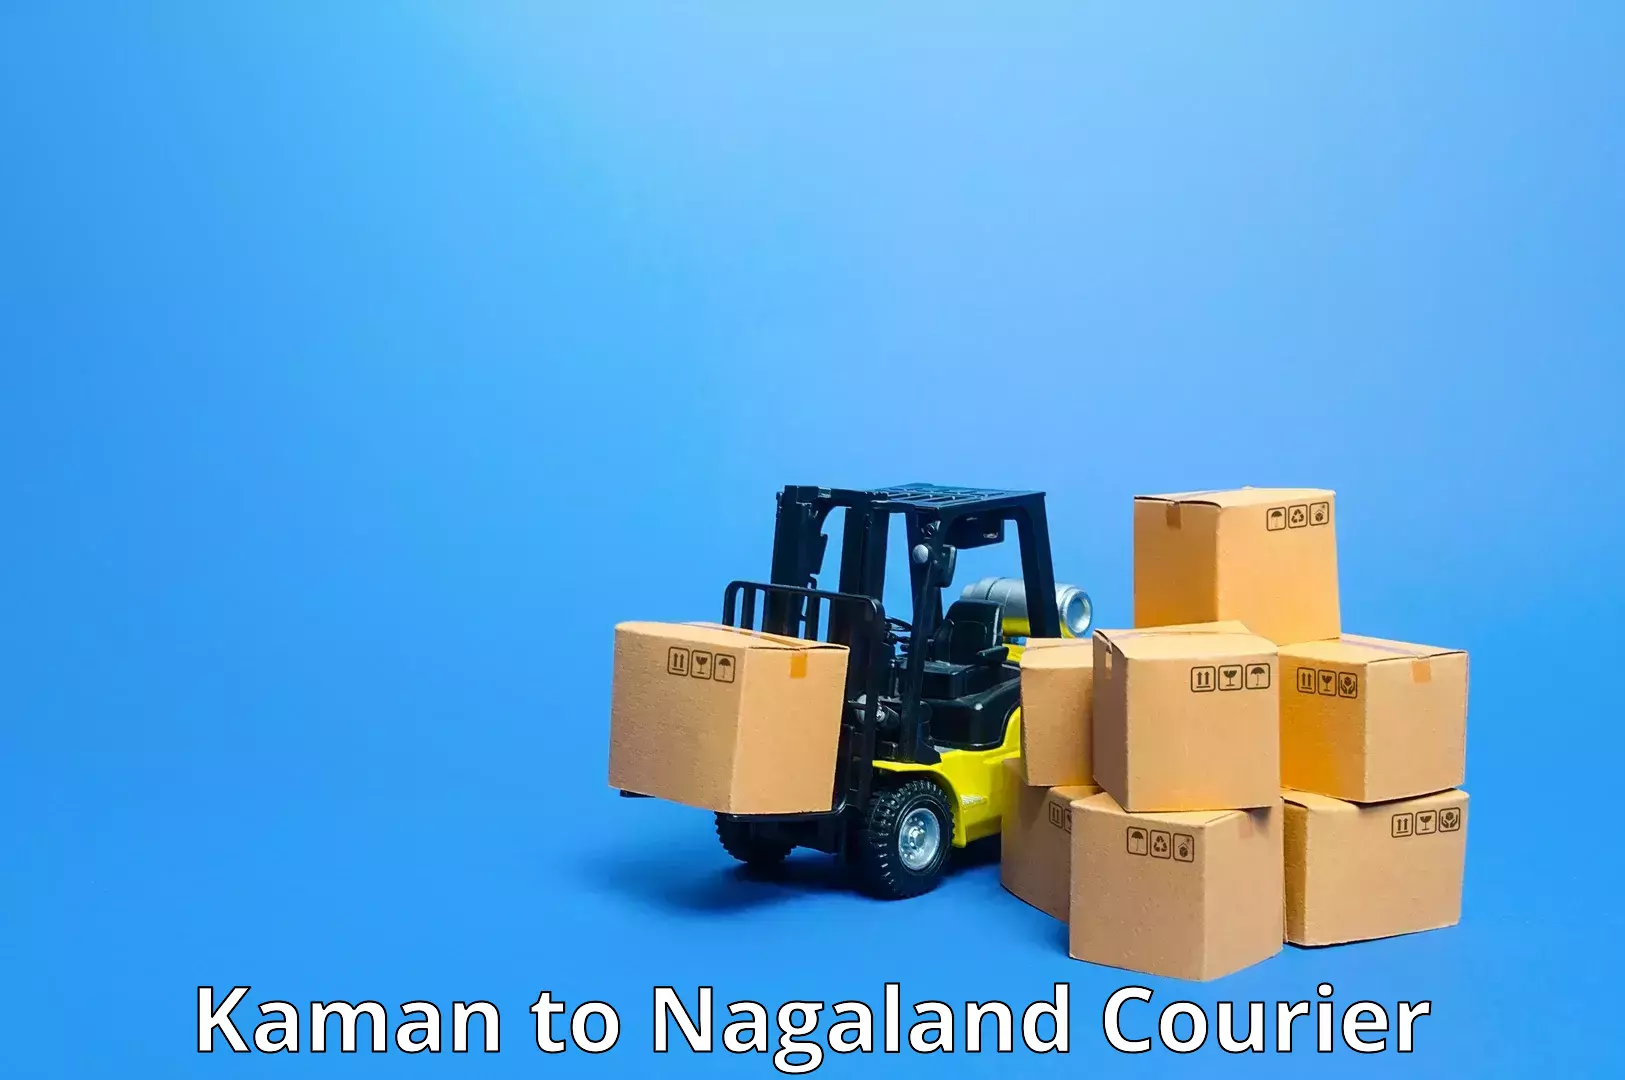 Affordable parcel service Kaman to Mon